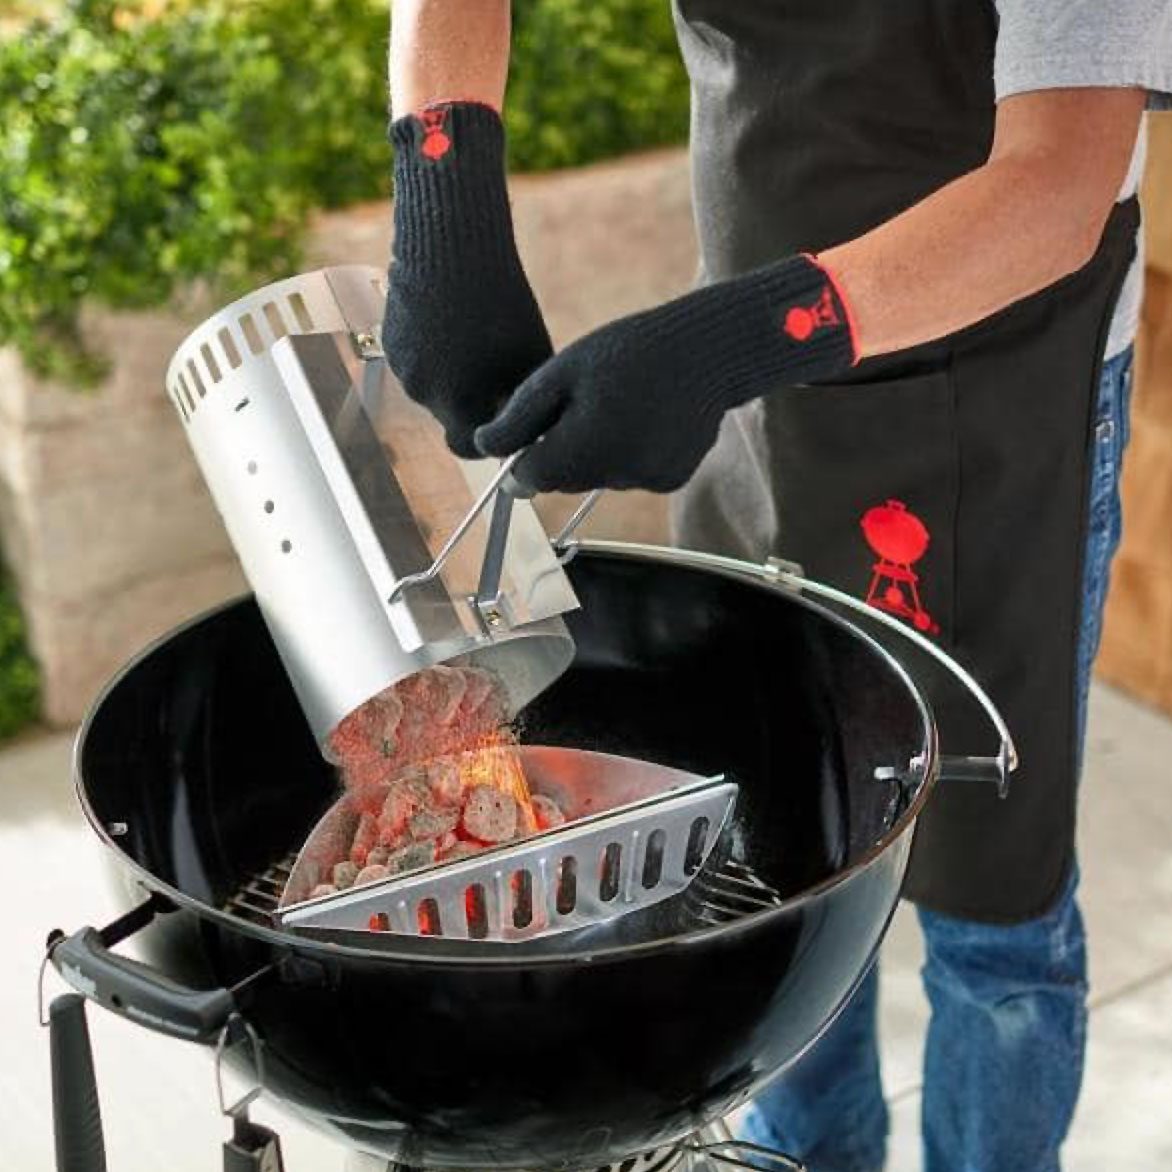 Toh Ecomm Fathers Day Grillers Rapidfire Chimney Charcoal Starter Via Homedeopt.com